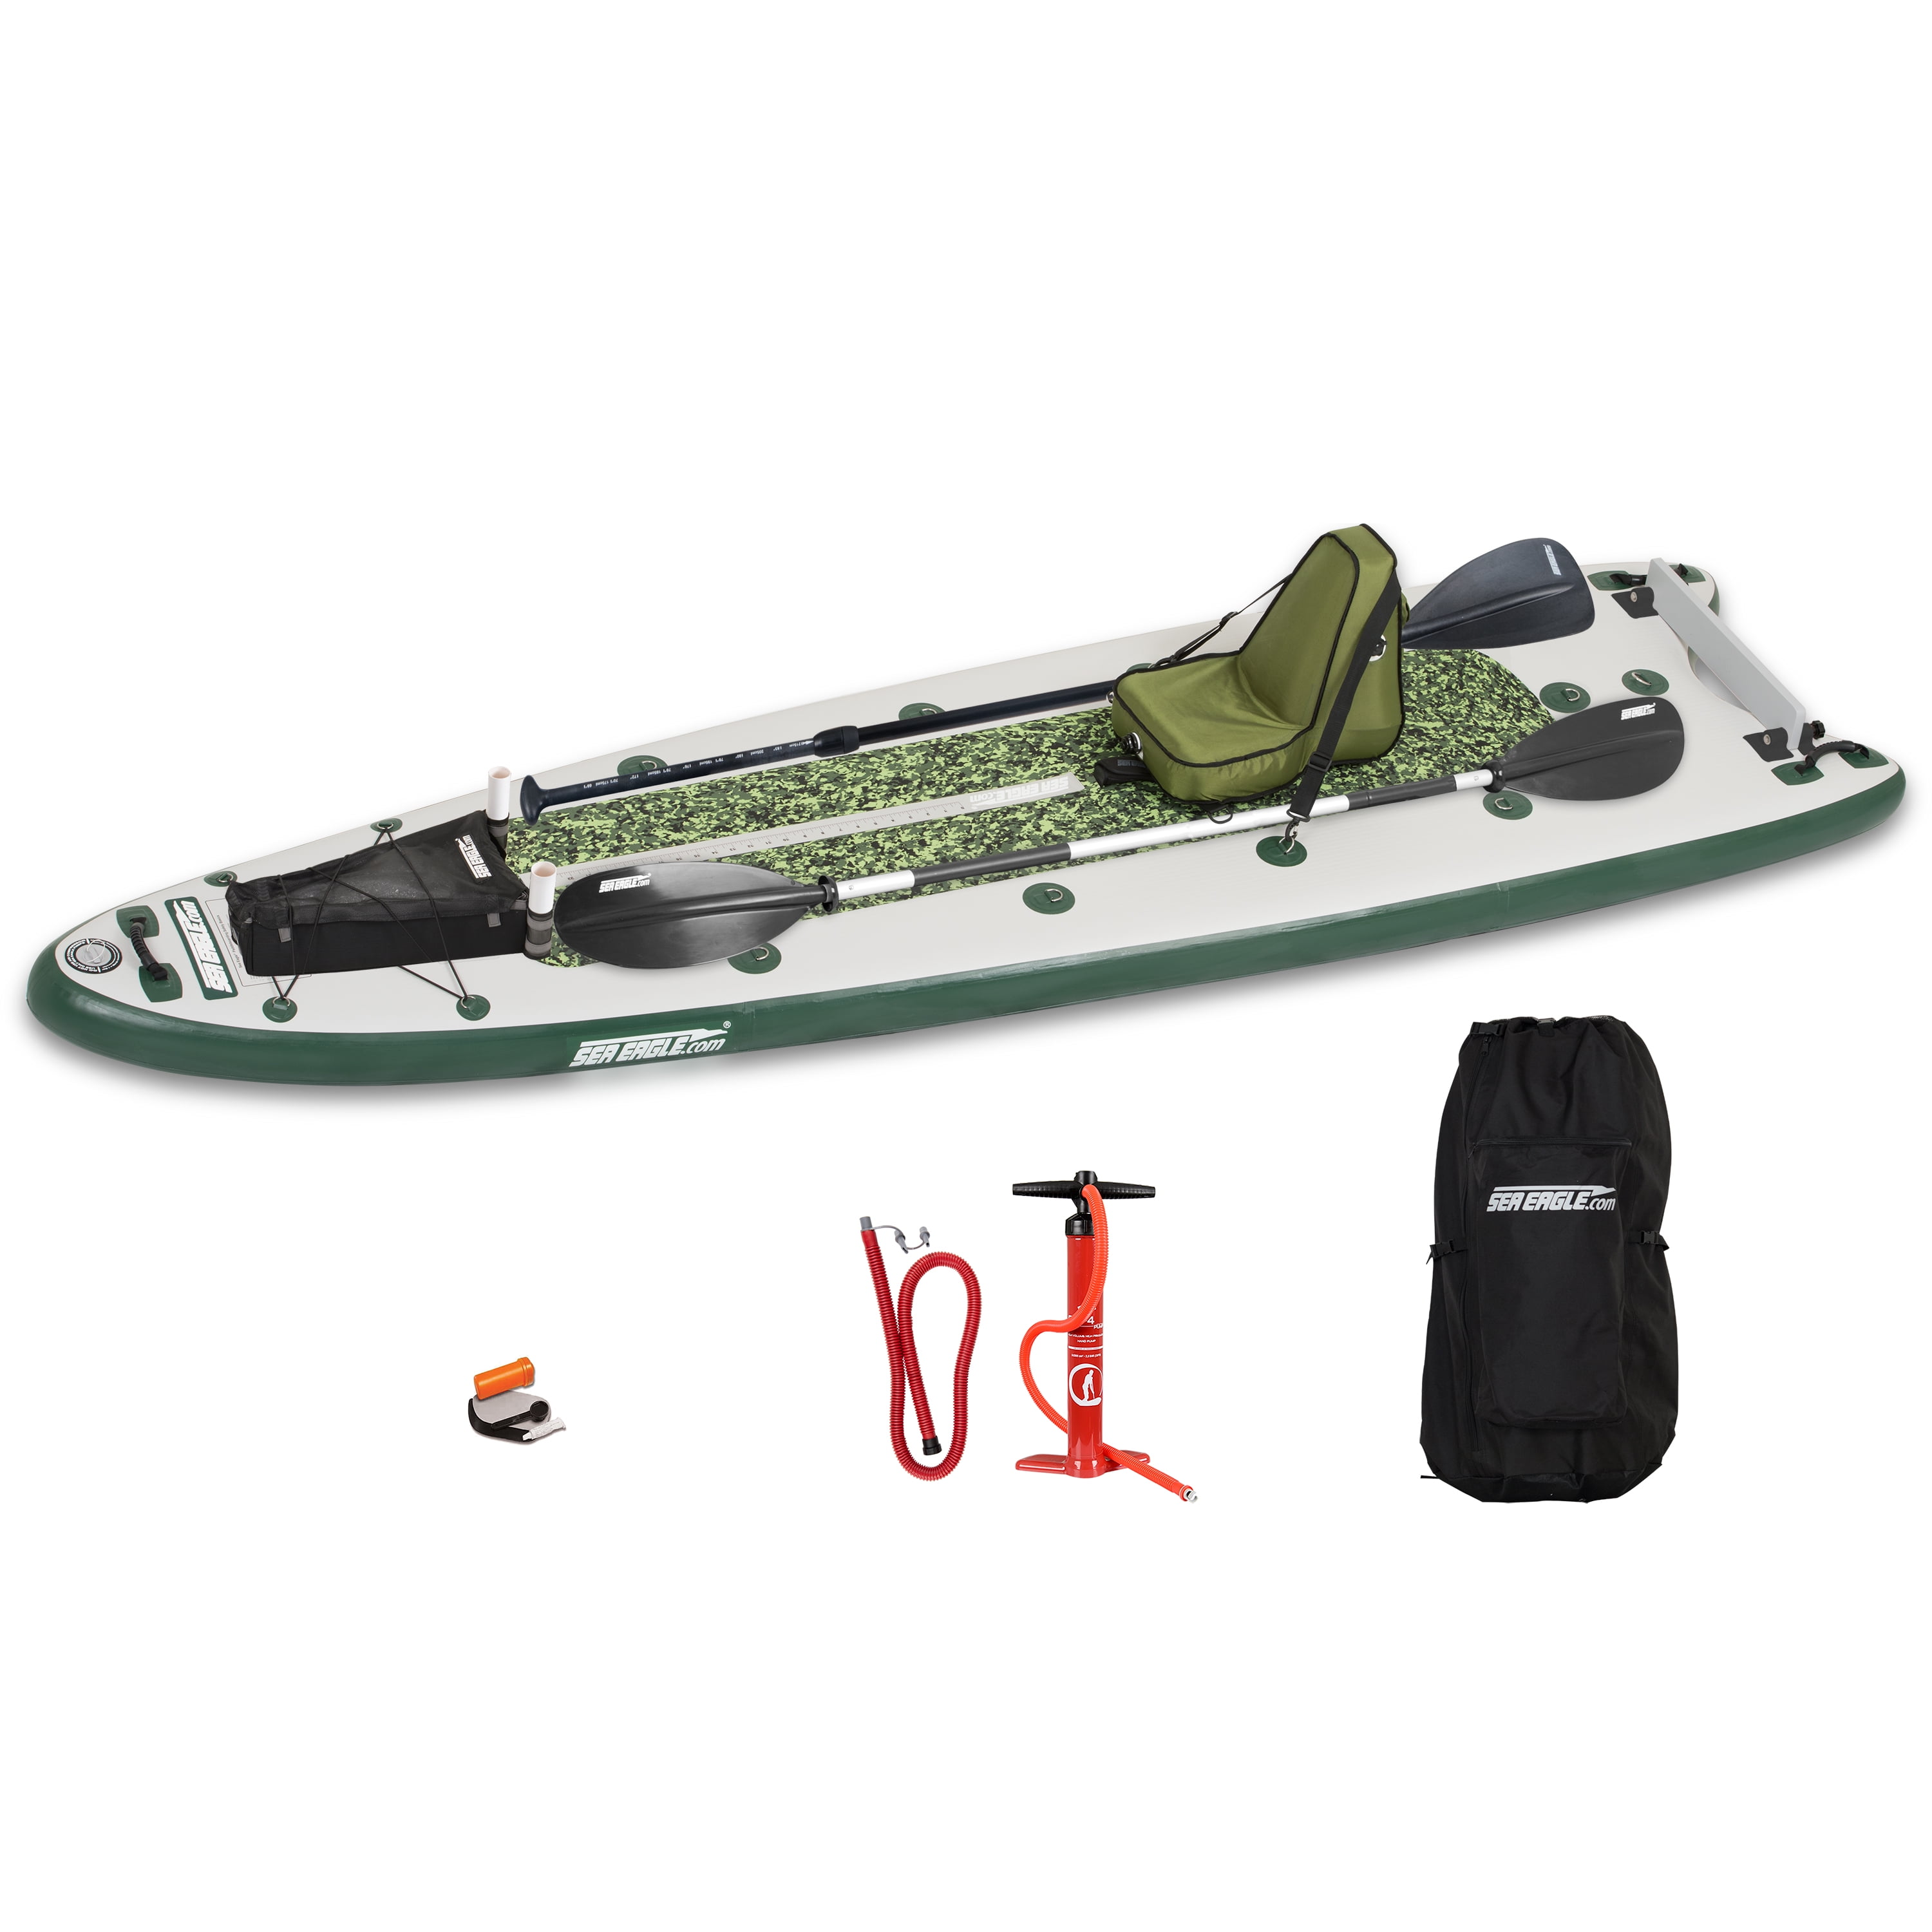 Sea Eagle FS126 12'6” Inflatable FishSUP Fishing Stand-Up Paddleboard  w/Paddle(s), Storage Box, Pump, Removable Transom, Backpack/Optional Seat -  Sit, Stand, Fish, Motor, or Troll- Start Up Package 